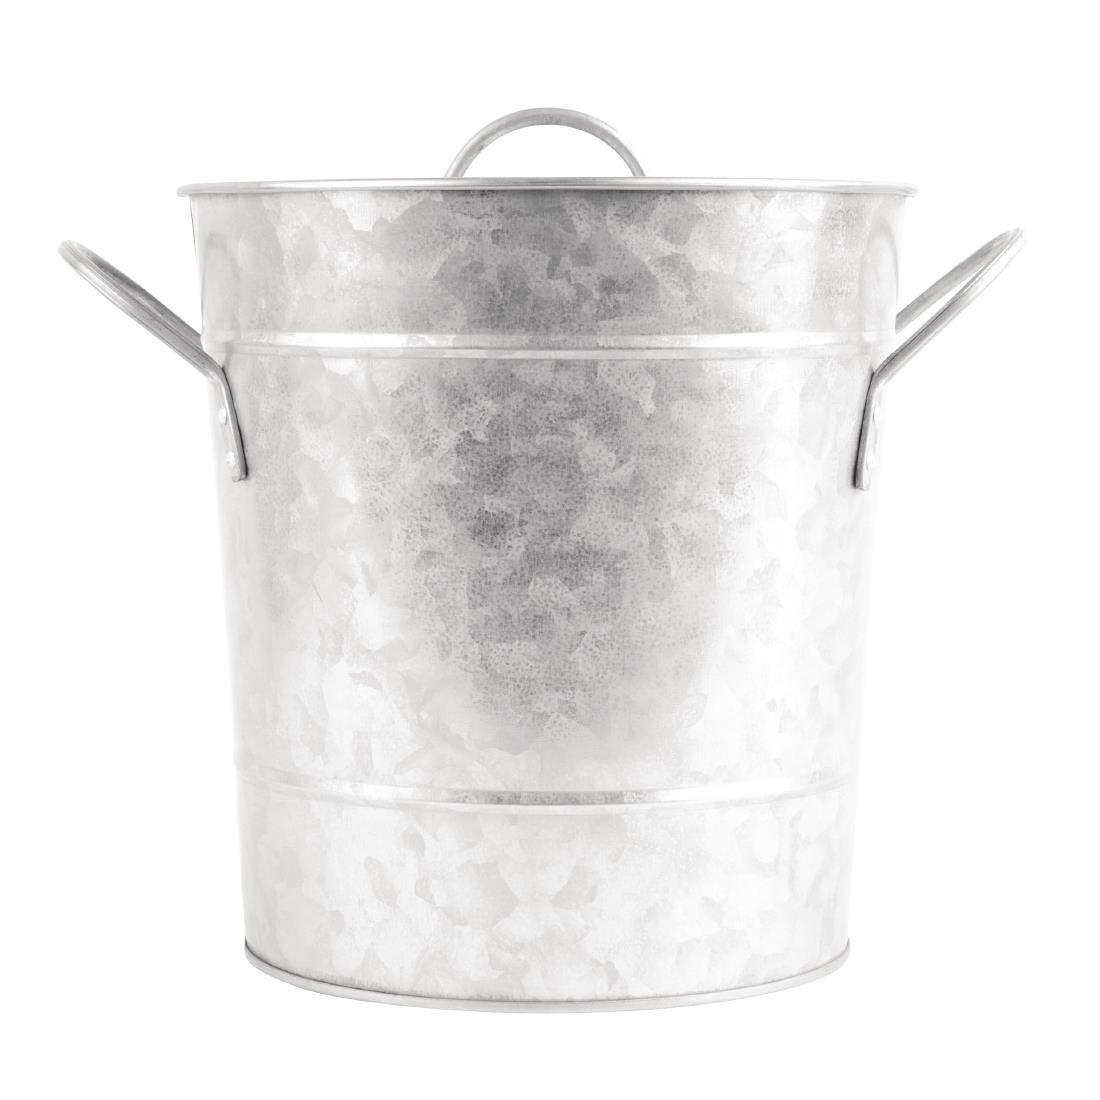 Olympia Galvanised Steel Wine And Champagne Bucket With Lid - CK824  - 2